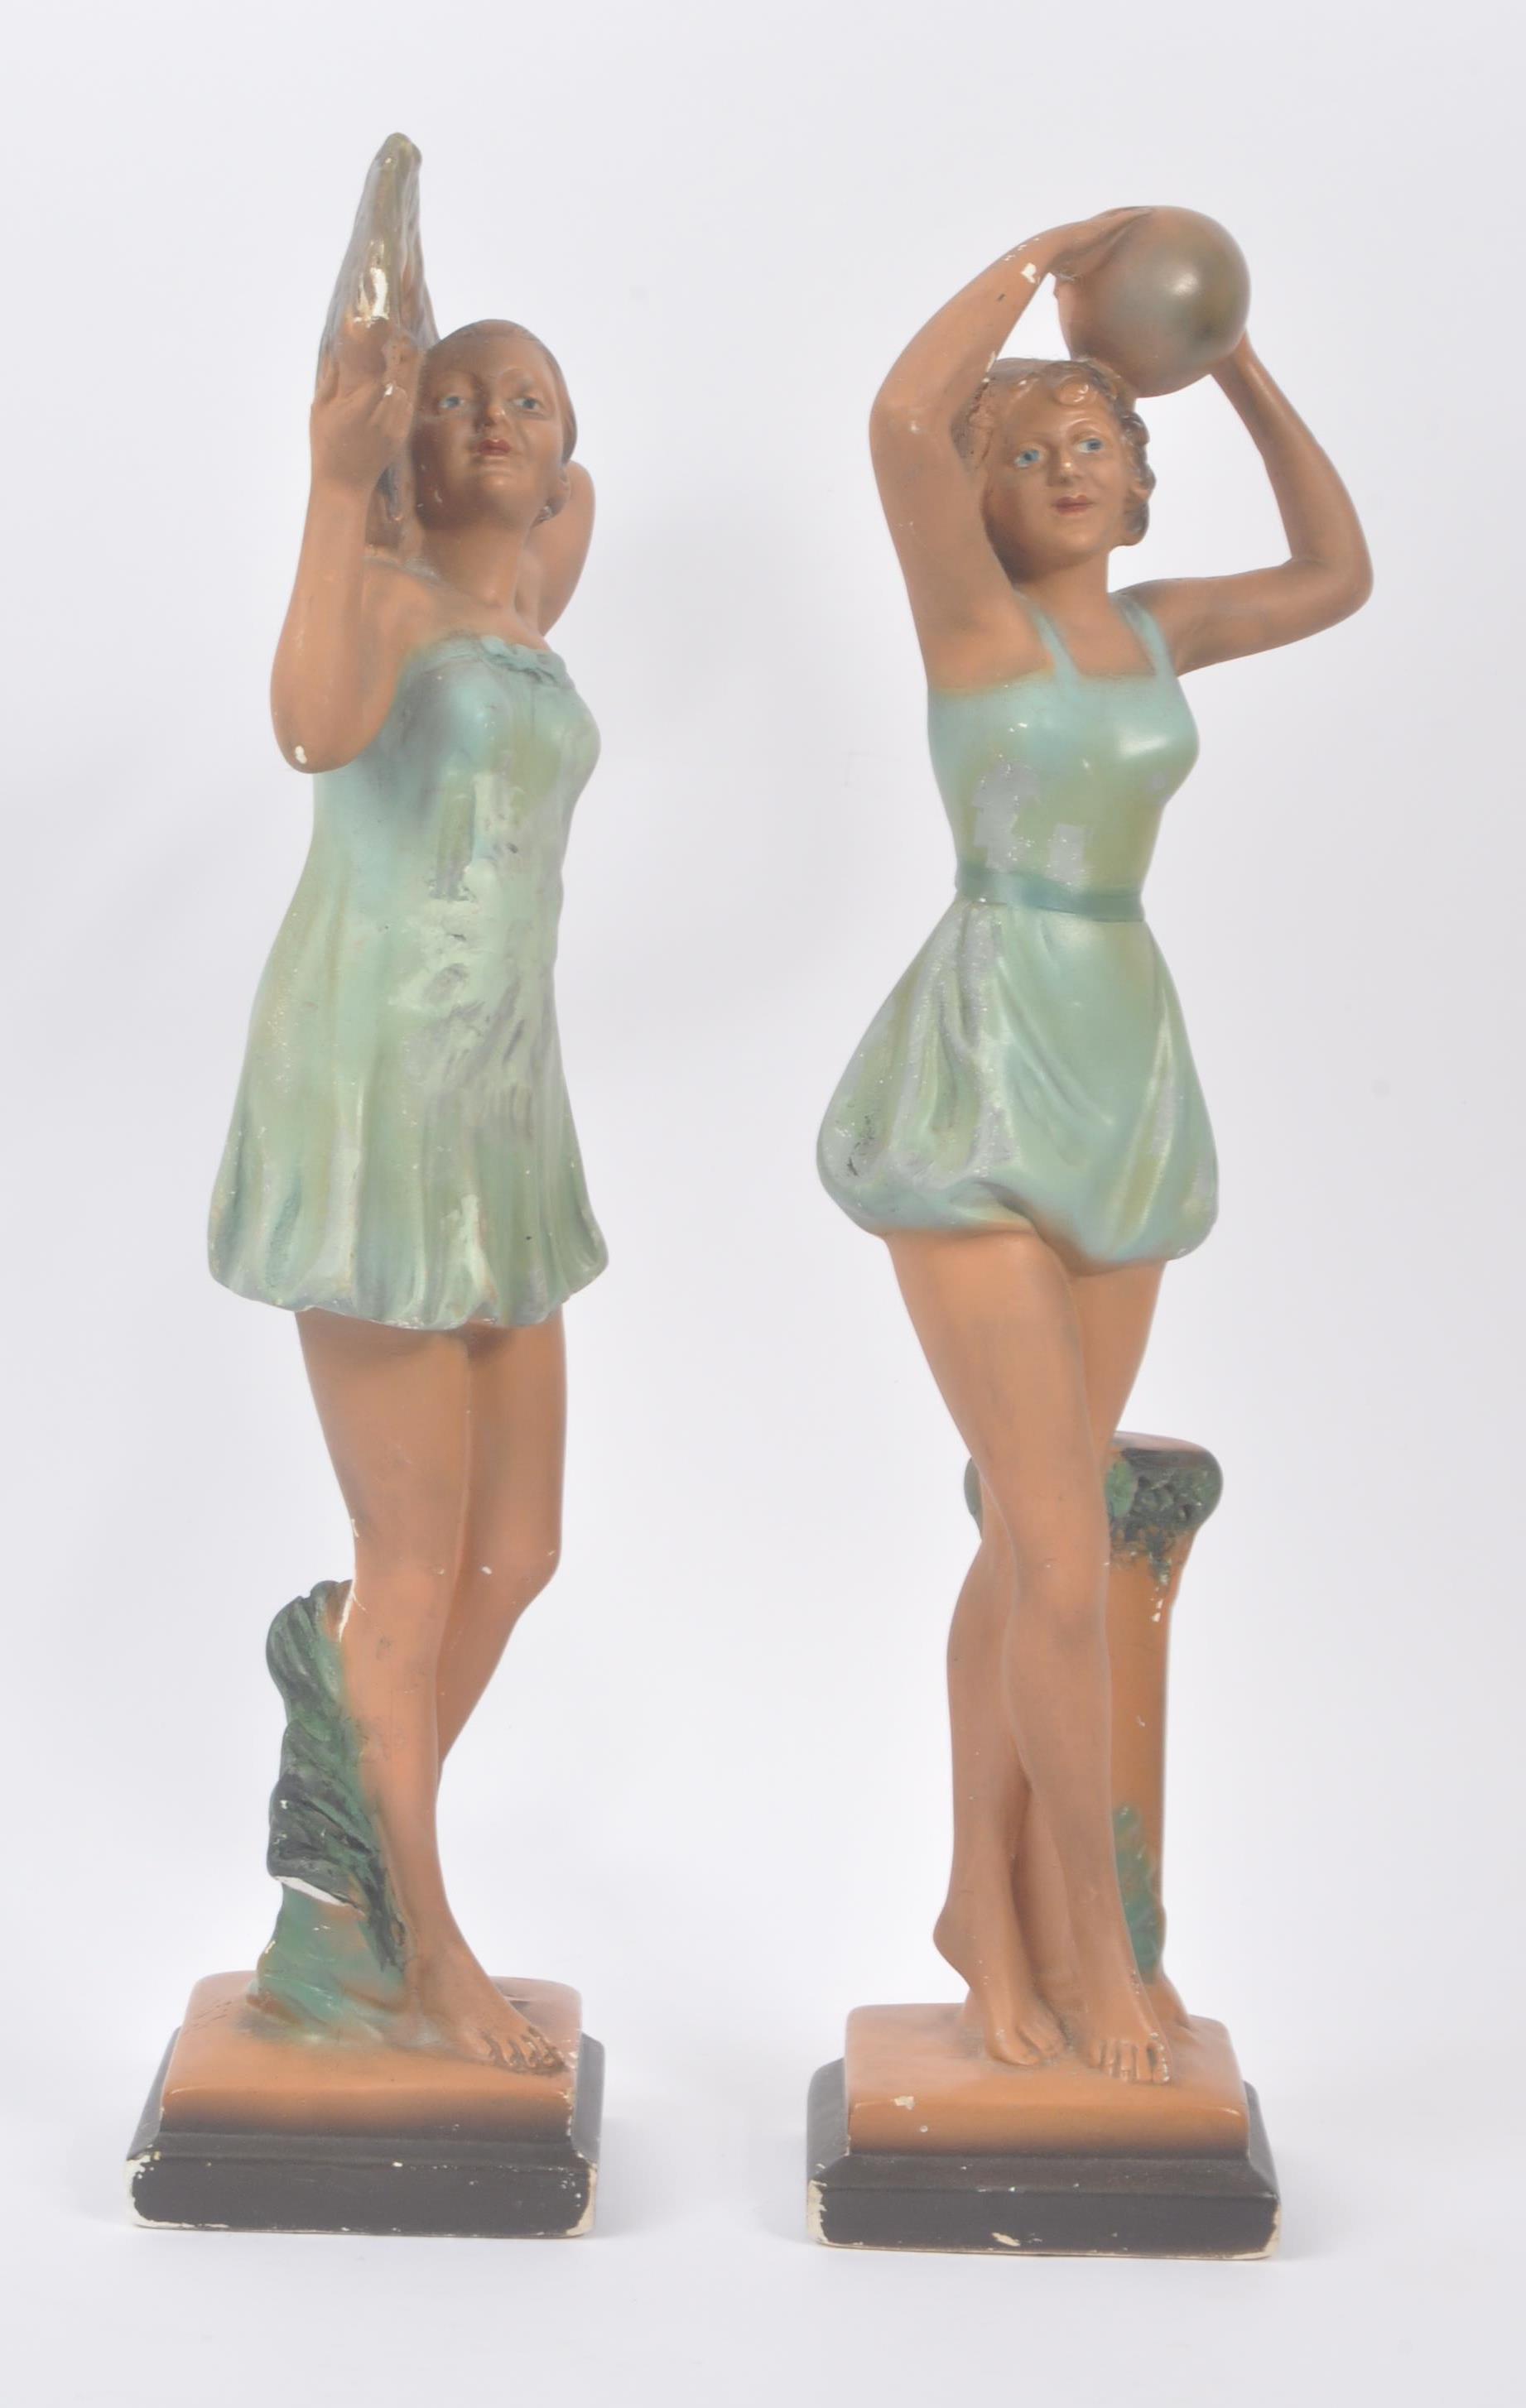 PAIR OF EARLY 20TH CENTURY ART DECO FIGURINES - Image 2 of 6